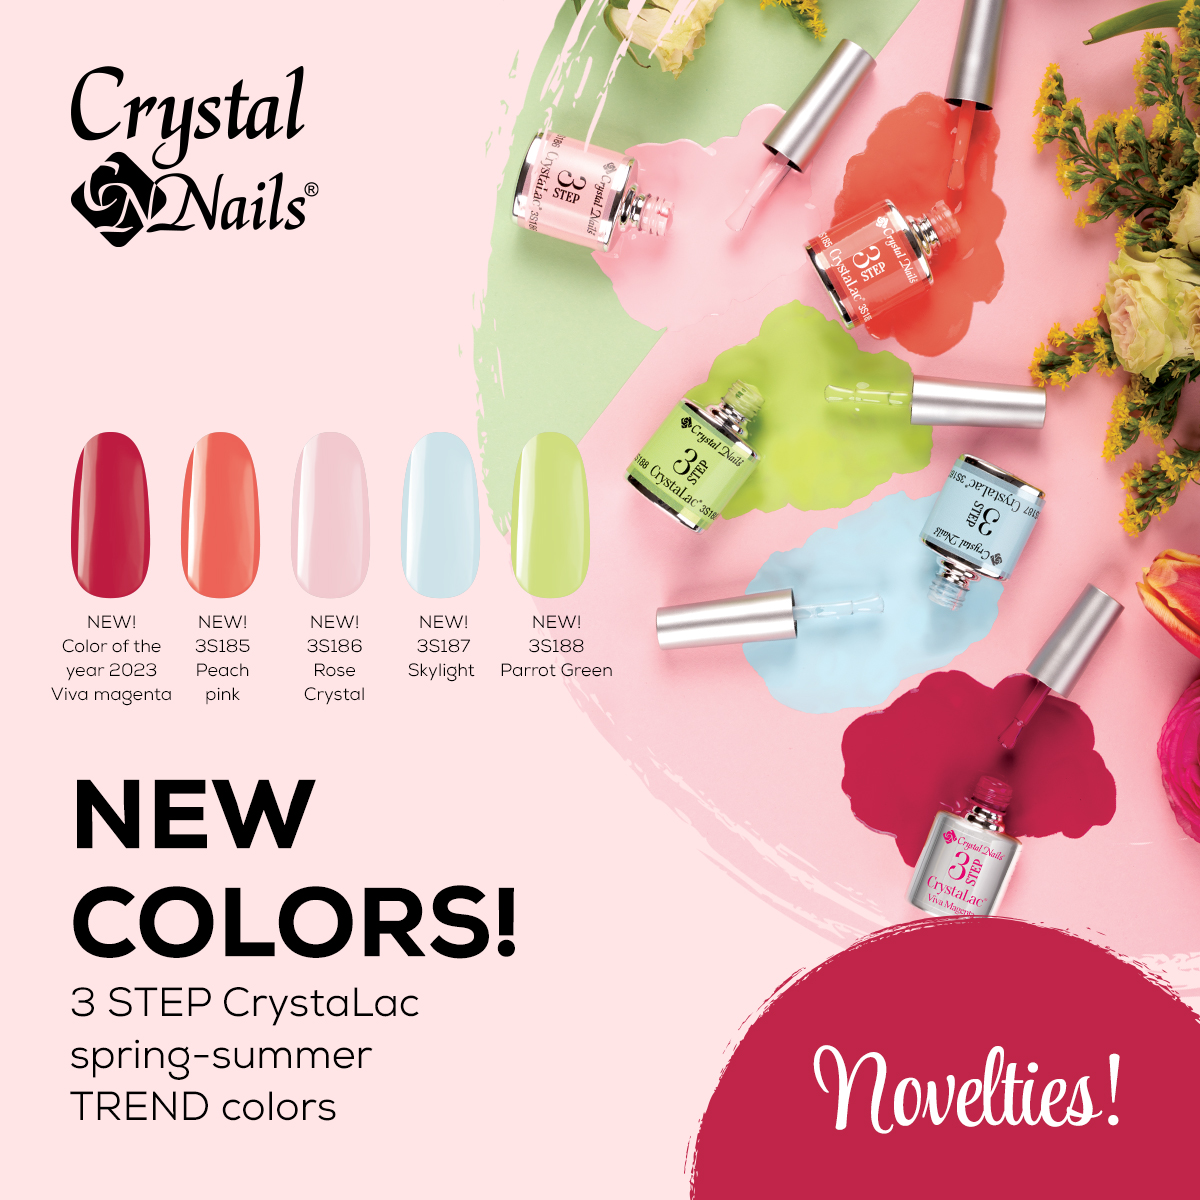 Top cool gel … did you know they are different? Novelties spring 2023